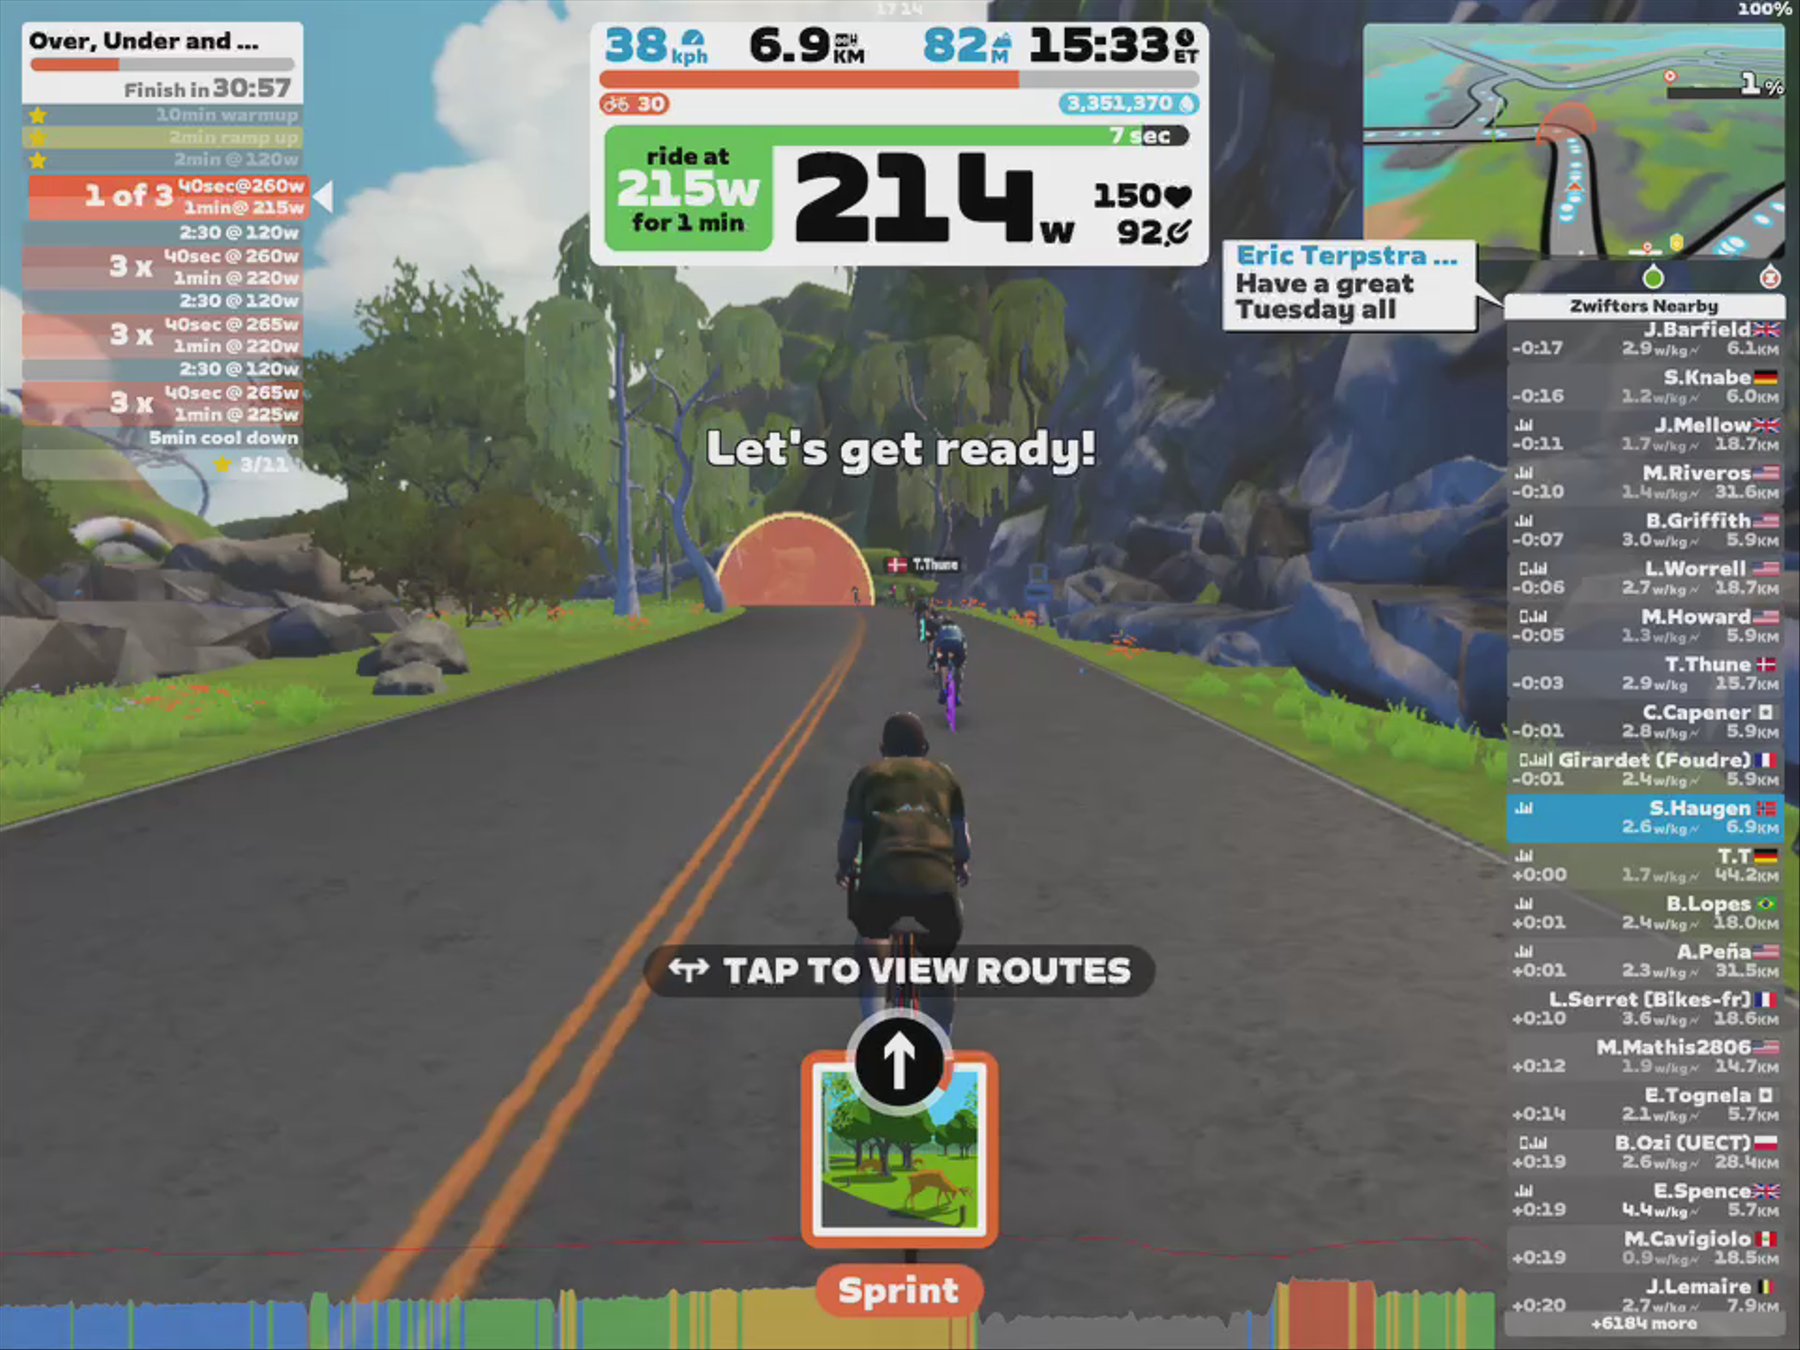 Zwift - Over, Under and Beyond in Watopia